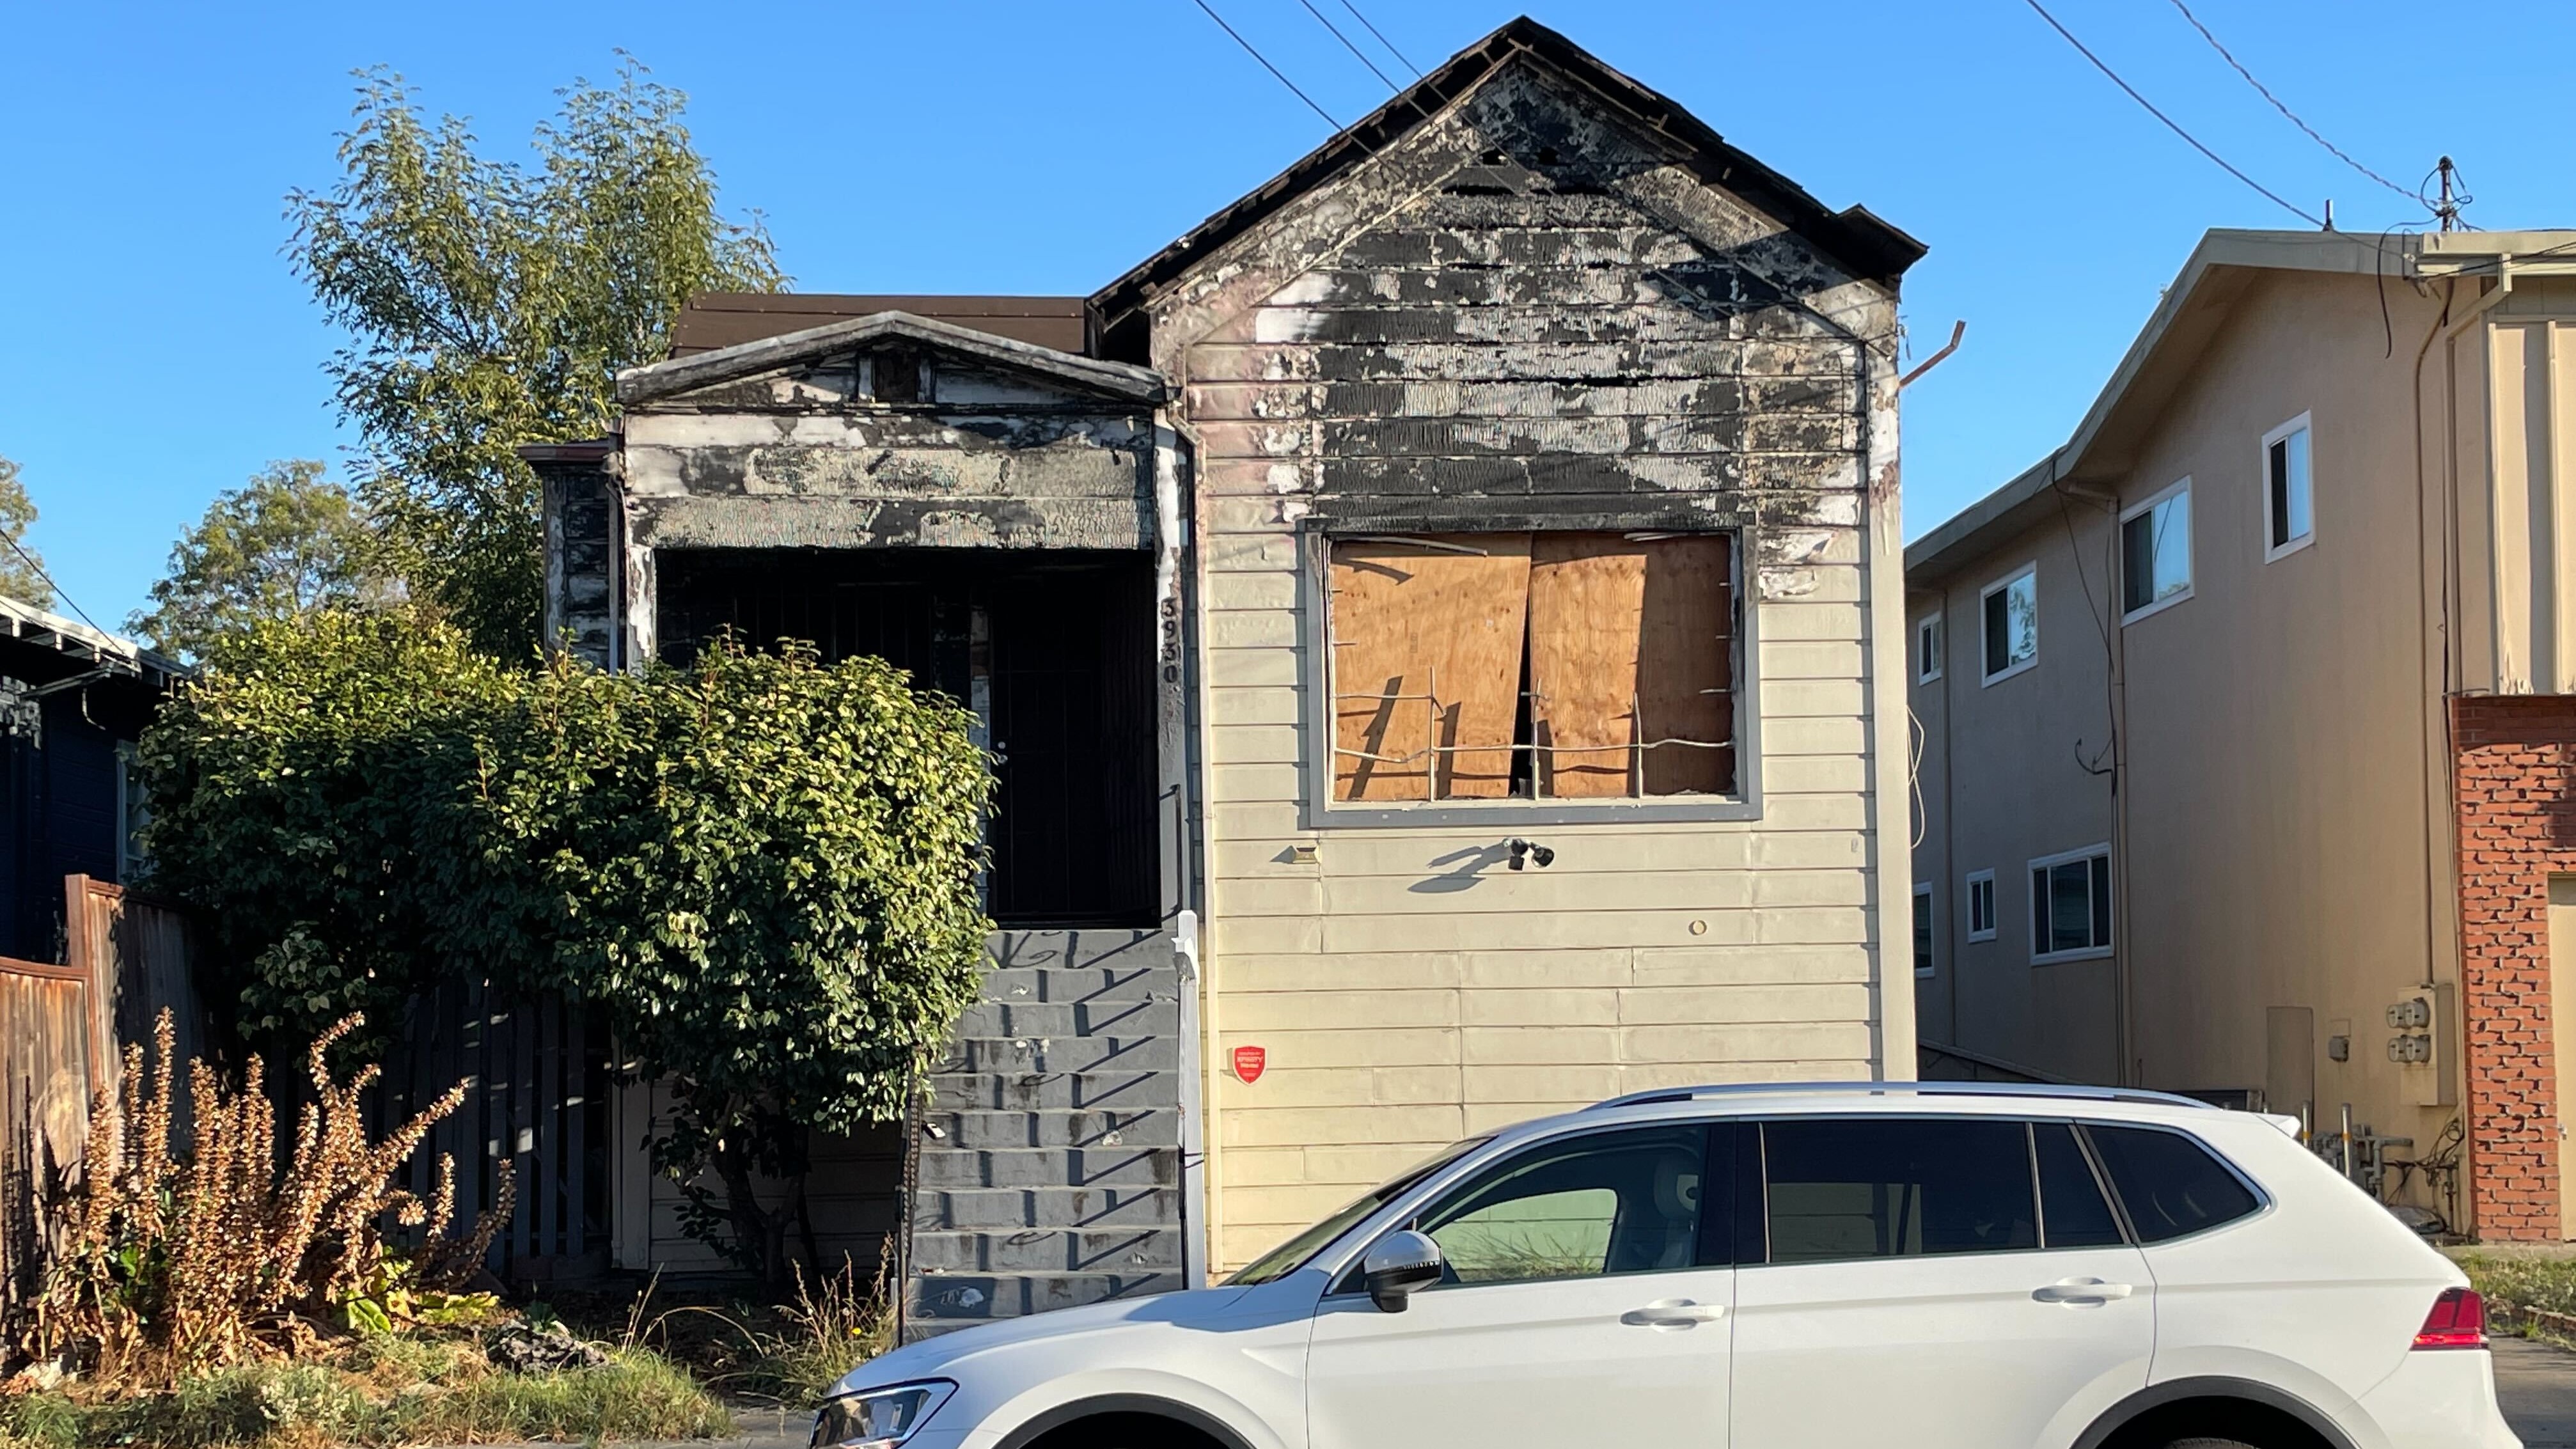 8cc37 1011 OaklandHome Housing Deconstructed Newsletter: Bay Area Housing Market Cooling Down, Burned Out House Listed for $765k, and SJ Offers RV Owners $500